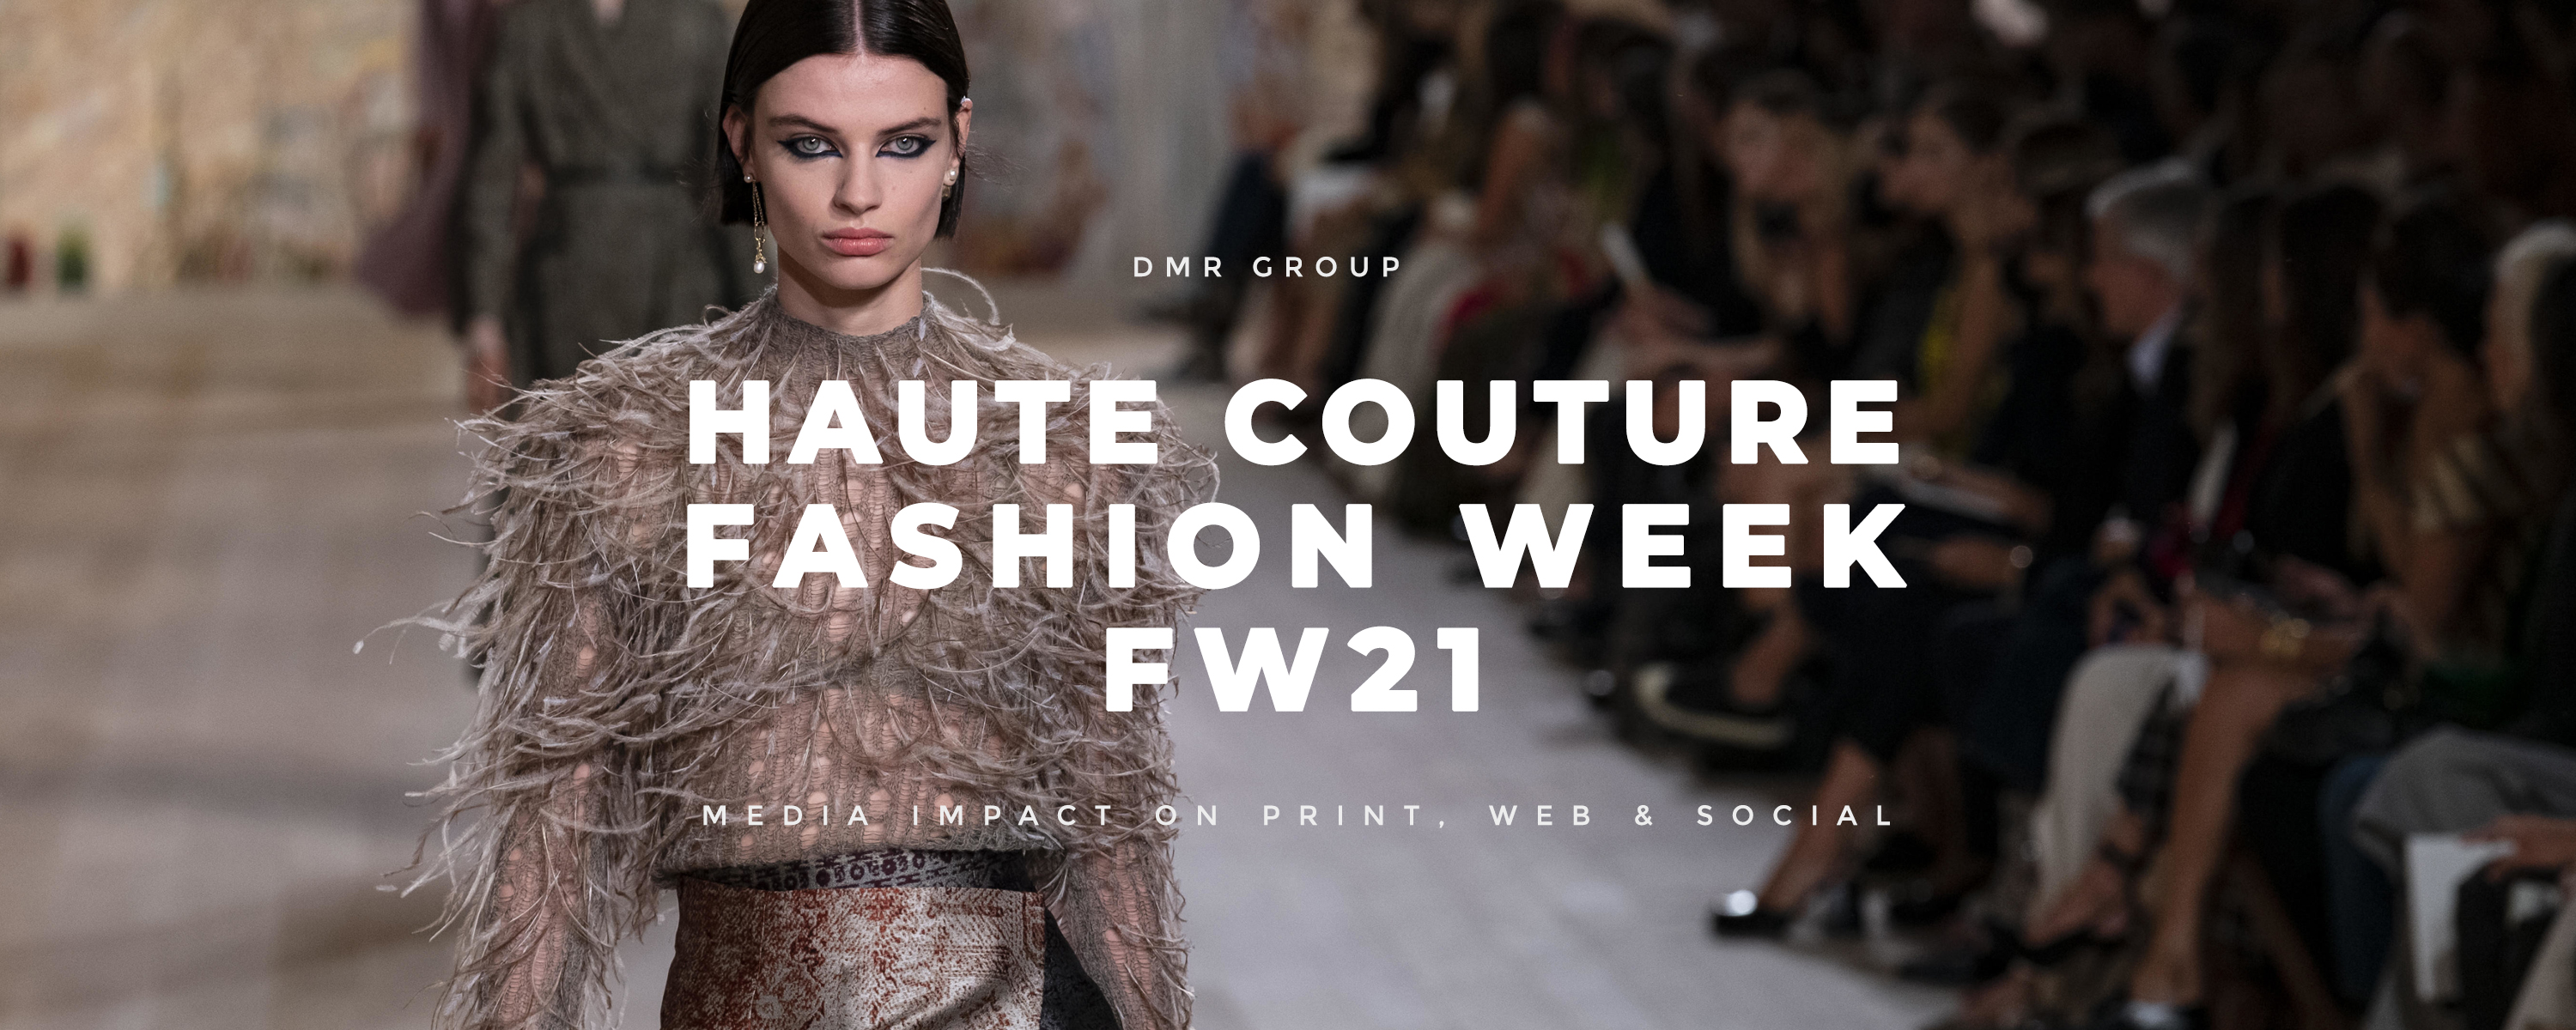 FW21 Haute Couture Fashion Week